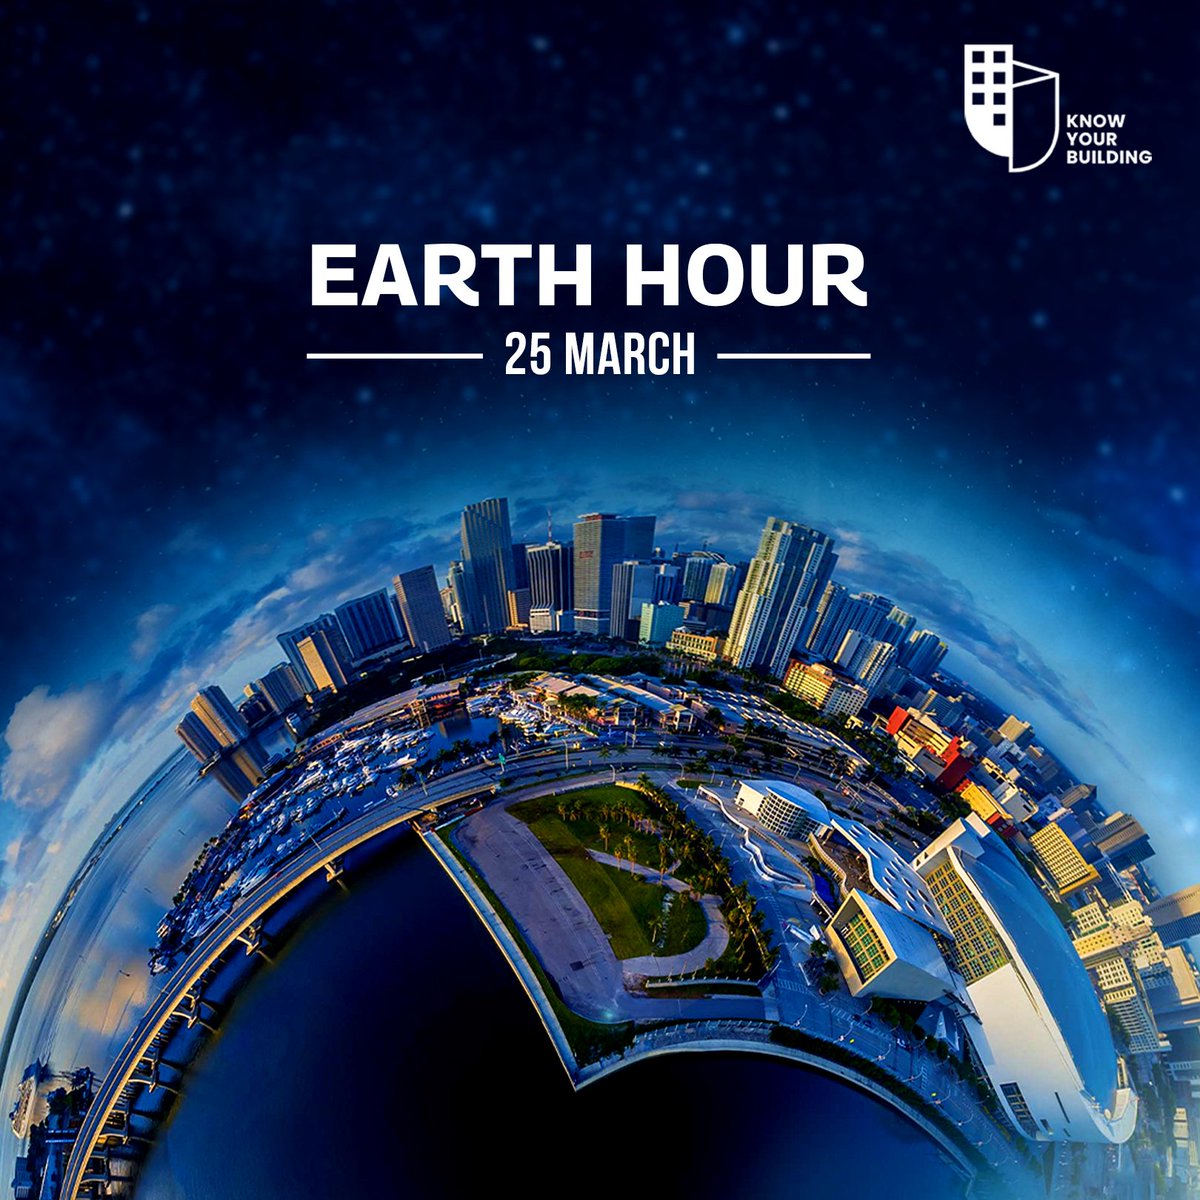 Tonight, let's all switch off the lights for one hour at 8:30 PM IST for #EarthHour. Let's take this moment to reflect on our impact on the planet and pledge to take small steps towards a more sustainable future. 

#KnowYourBuilding #climate #savetheplanet #wirelessbms